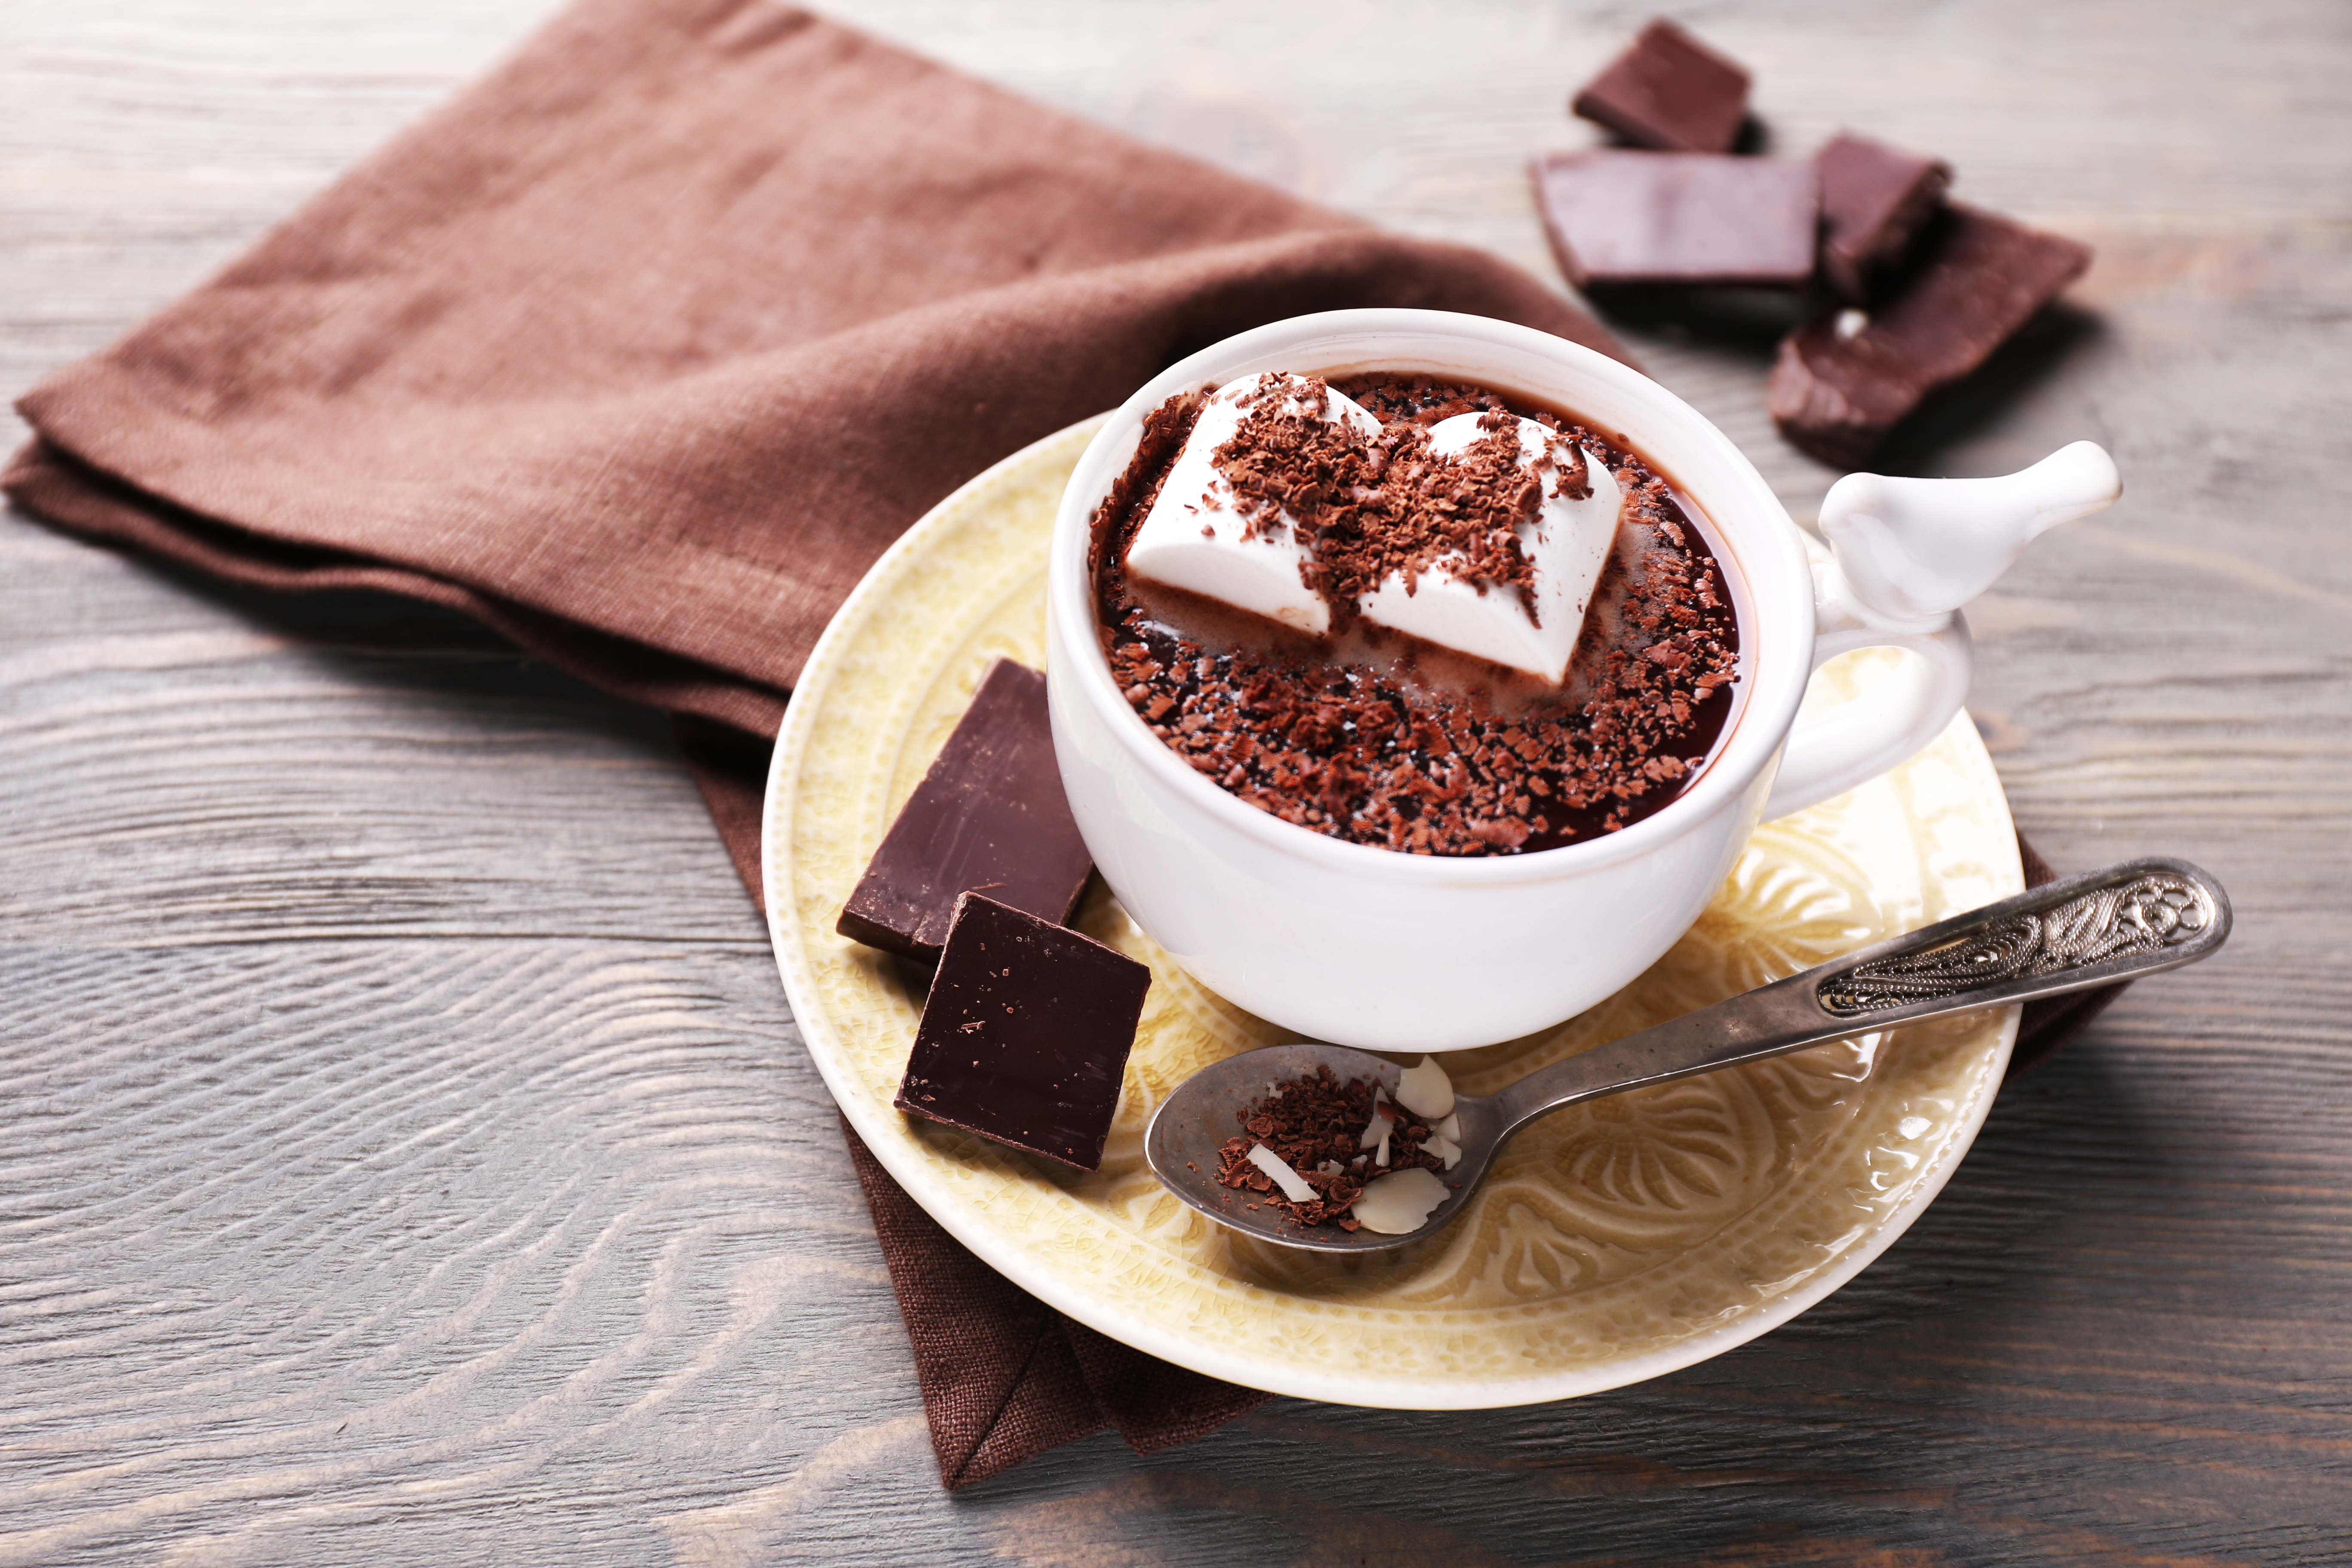 Hot Chocolate Cup Chocolate Drink 5472x3648